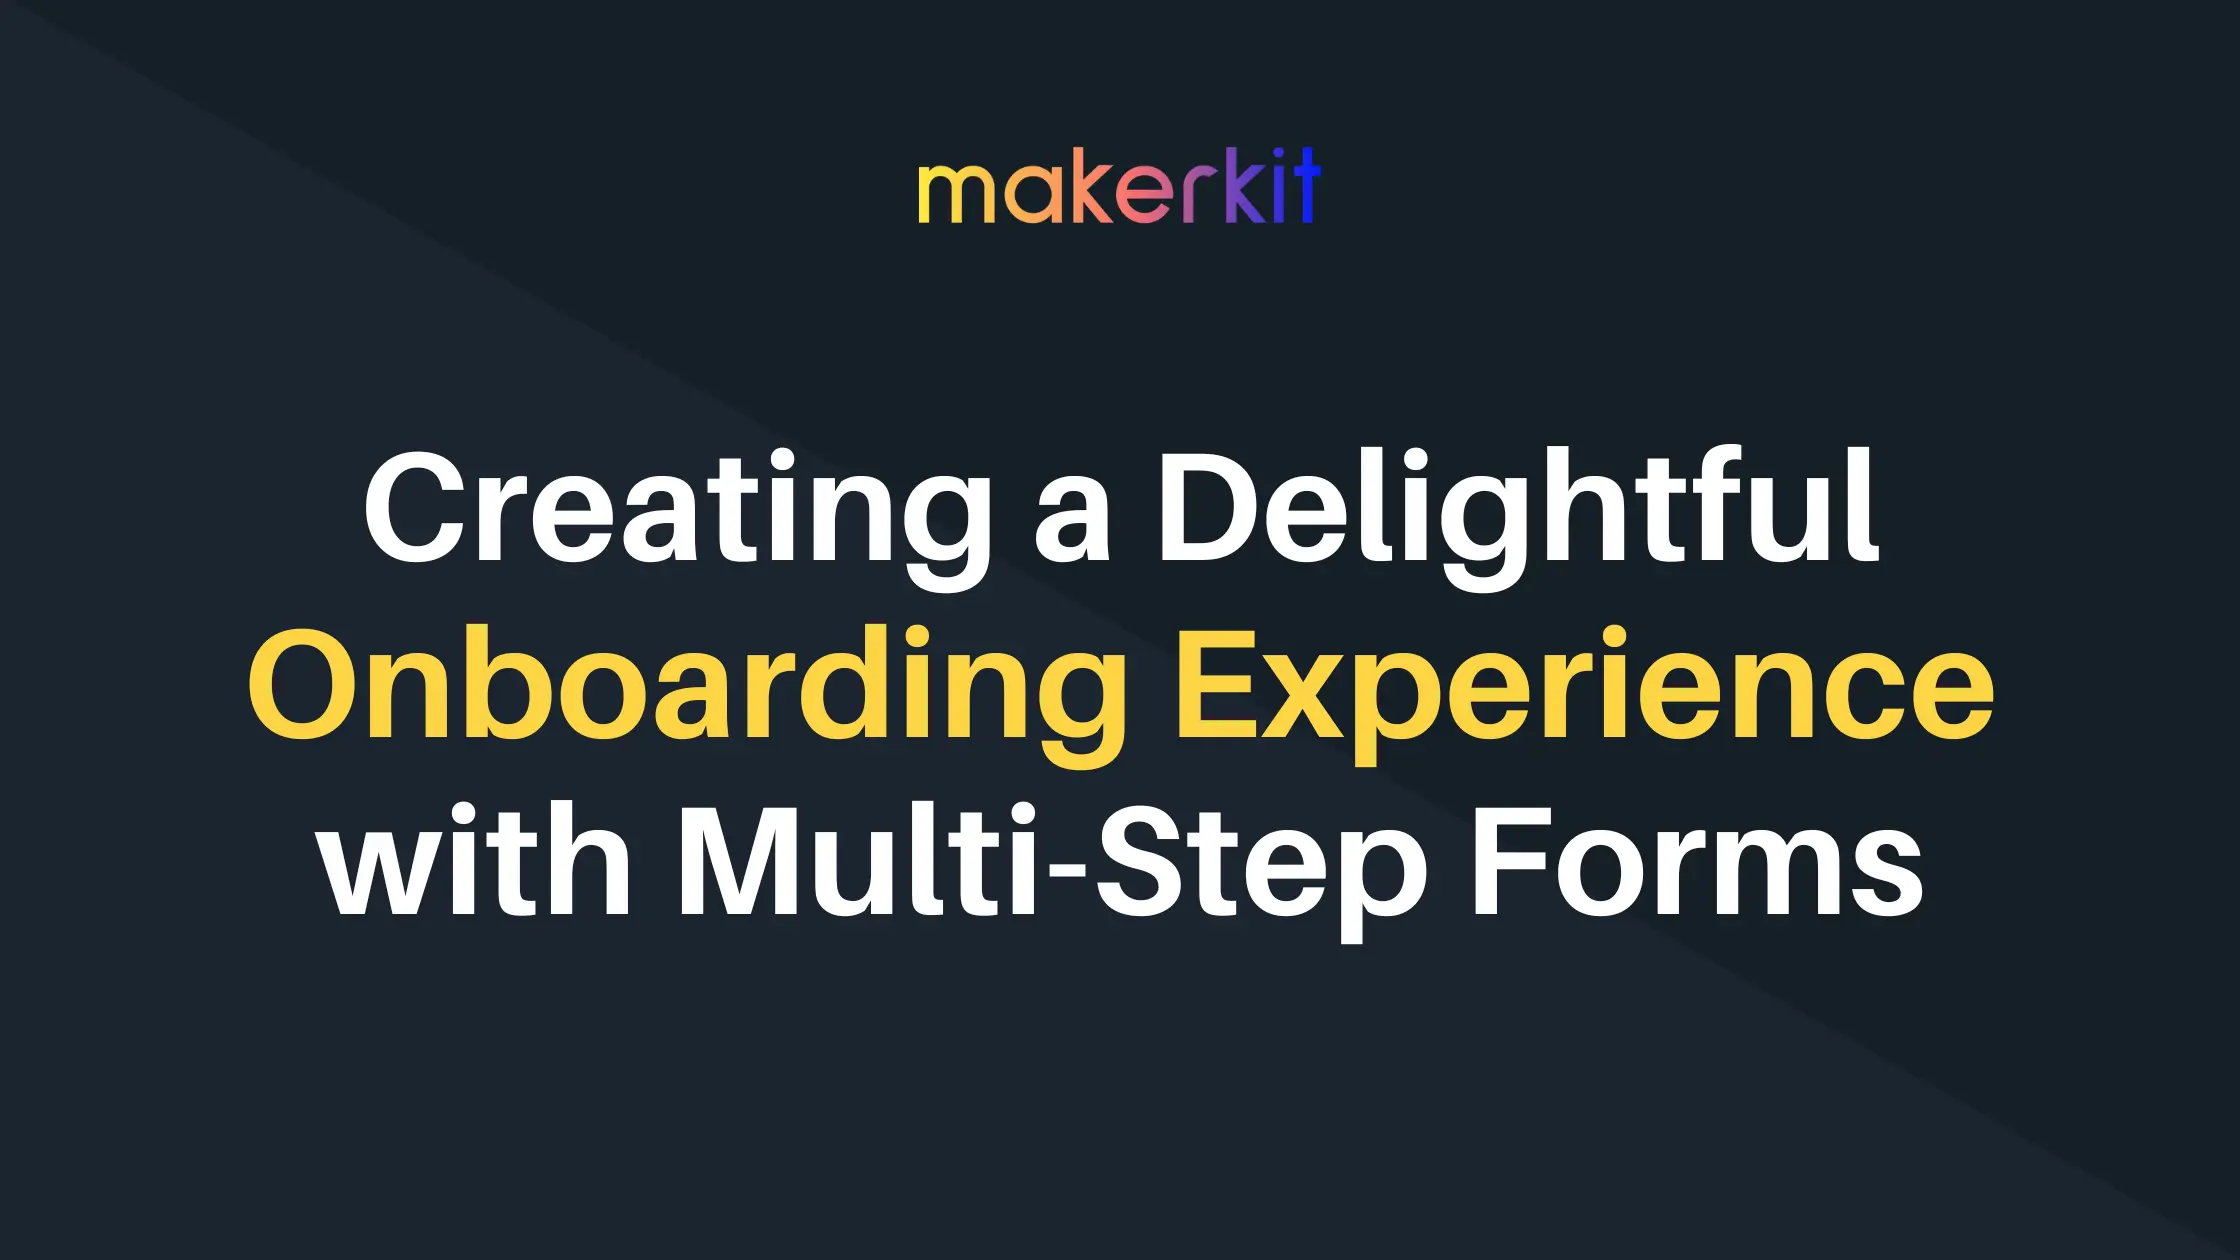 Cover Image for Creating a Delightful Onboarding Experience with Multi-Step Forms